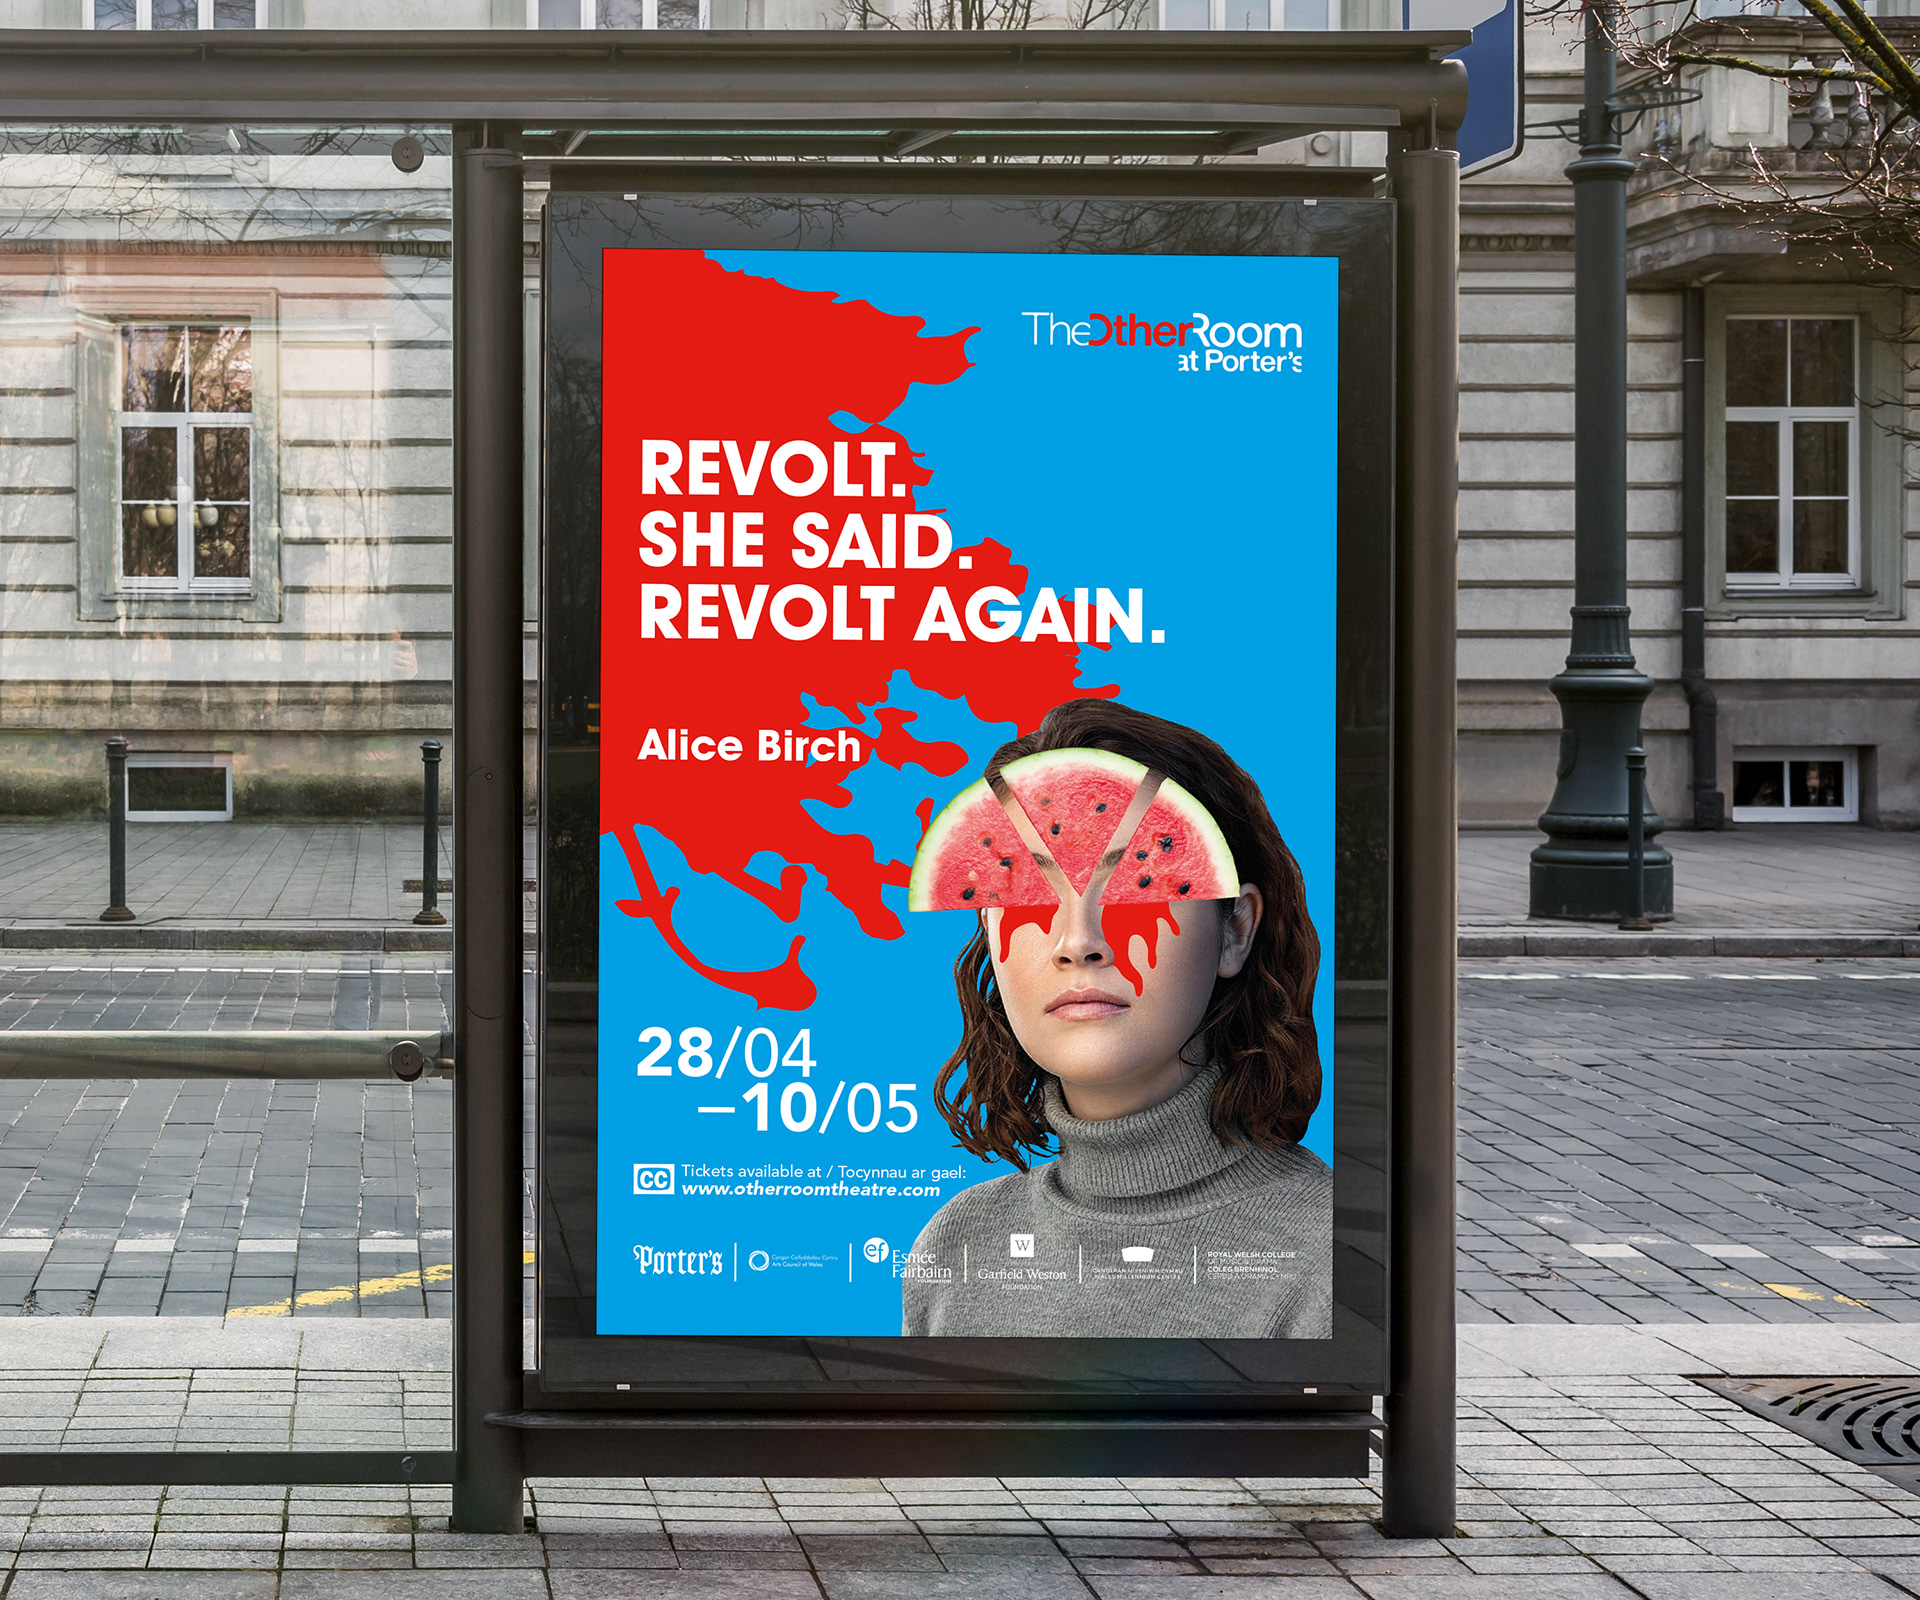 A poster and ad campaign created for The Other Room Theatre in Cardiff, for their production of 'Revolt. She said. Revolt again'.